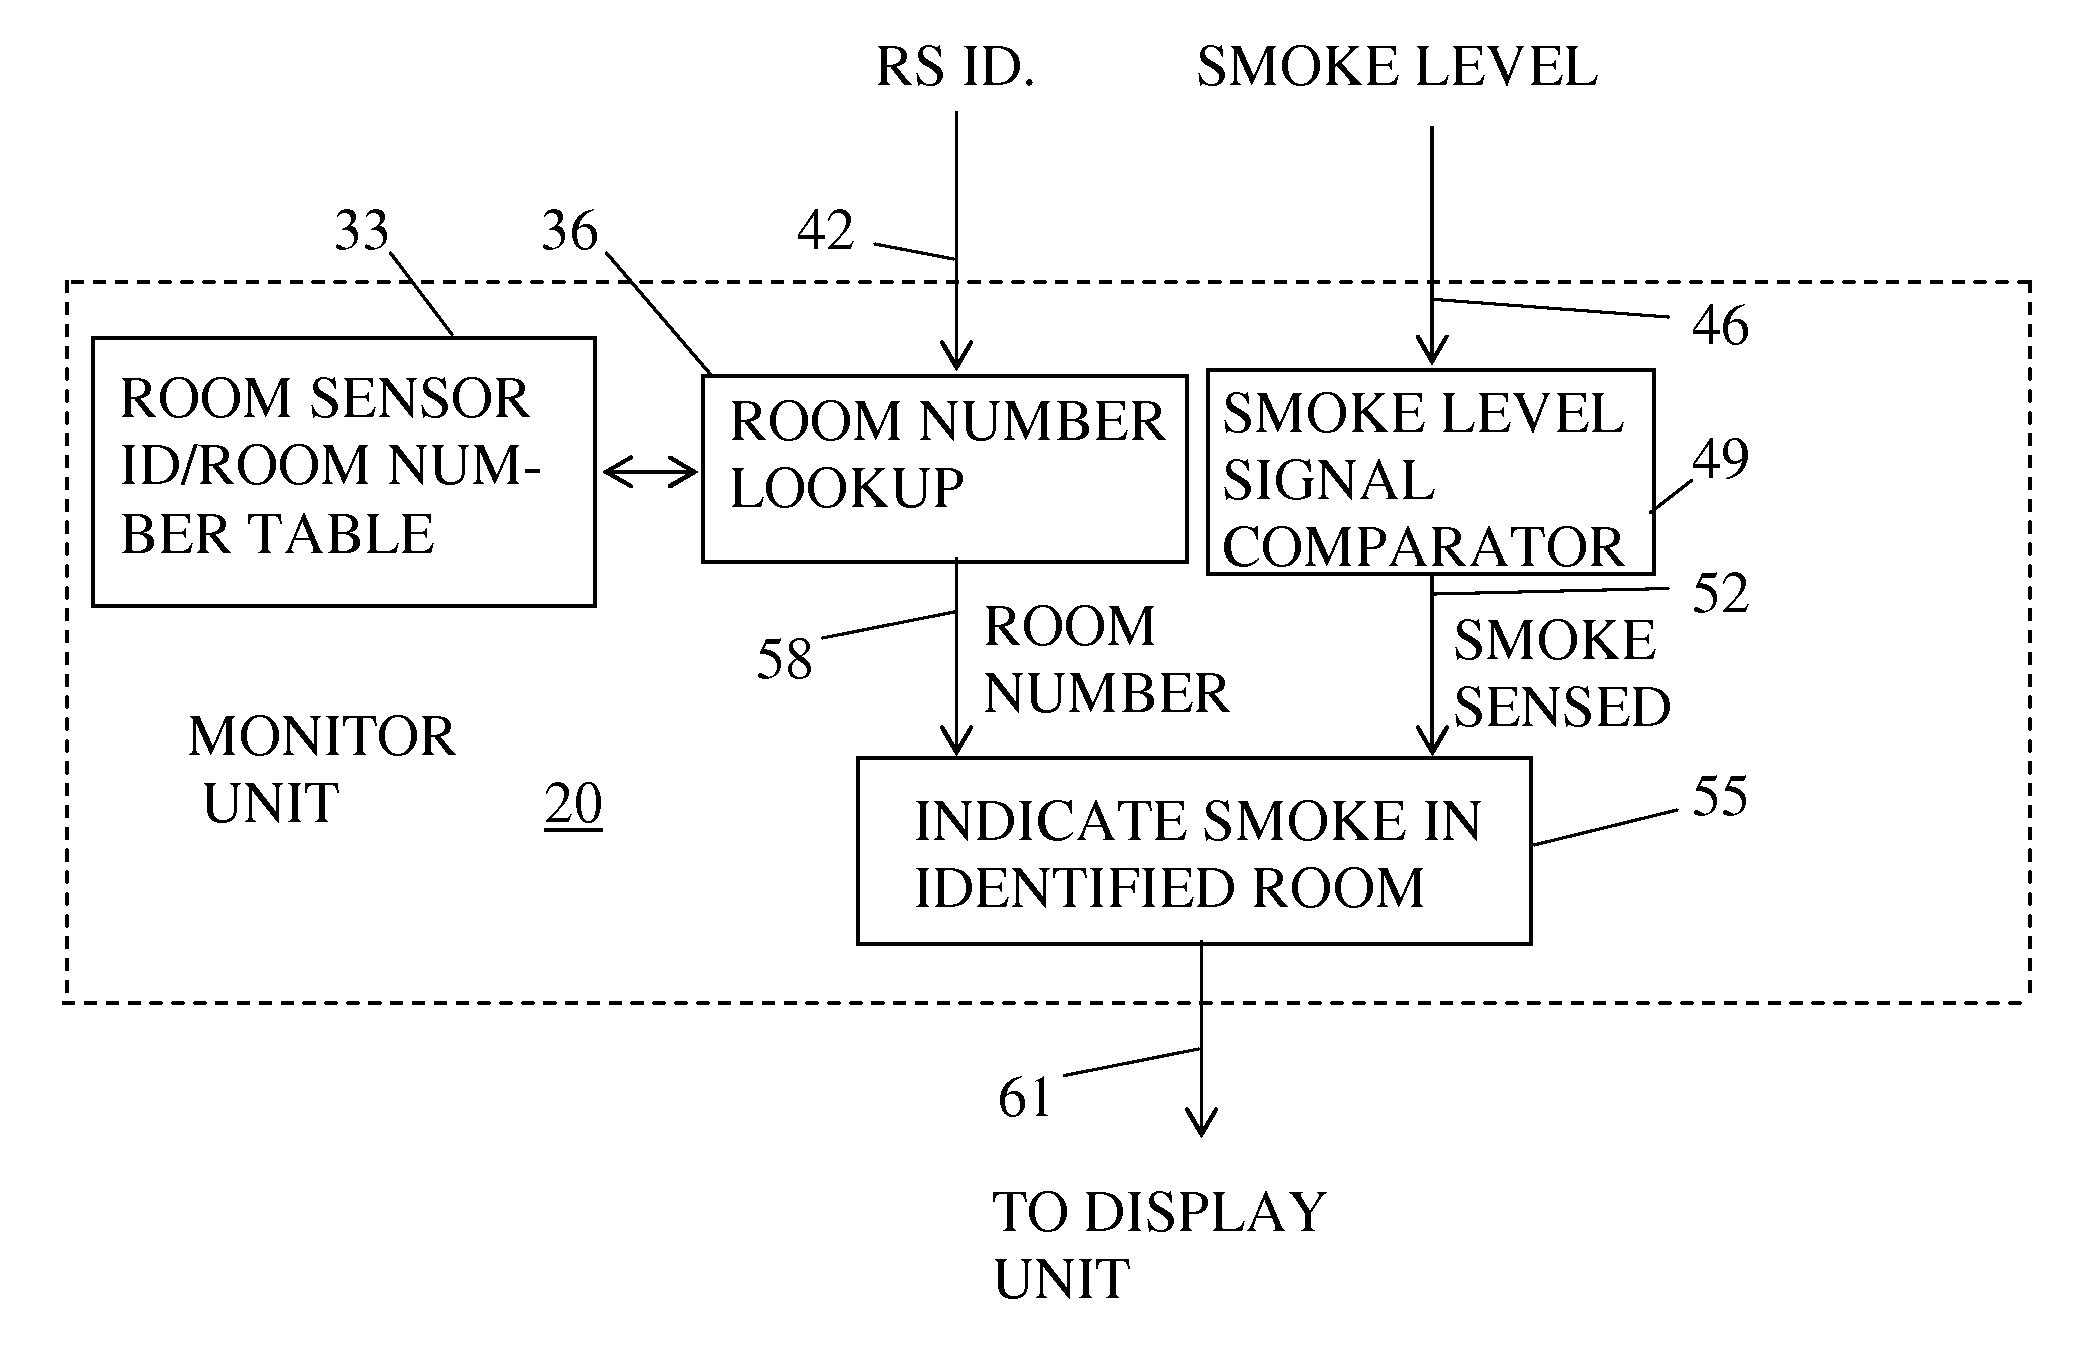 Recreational smoking monitor system for use in occupied spaces